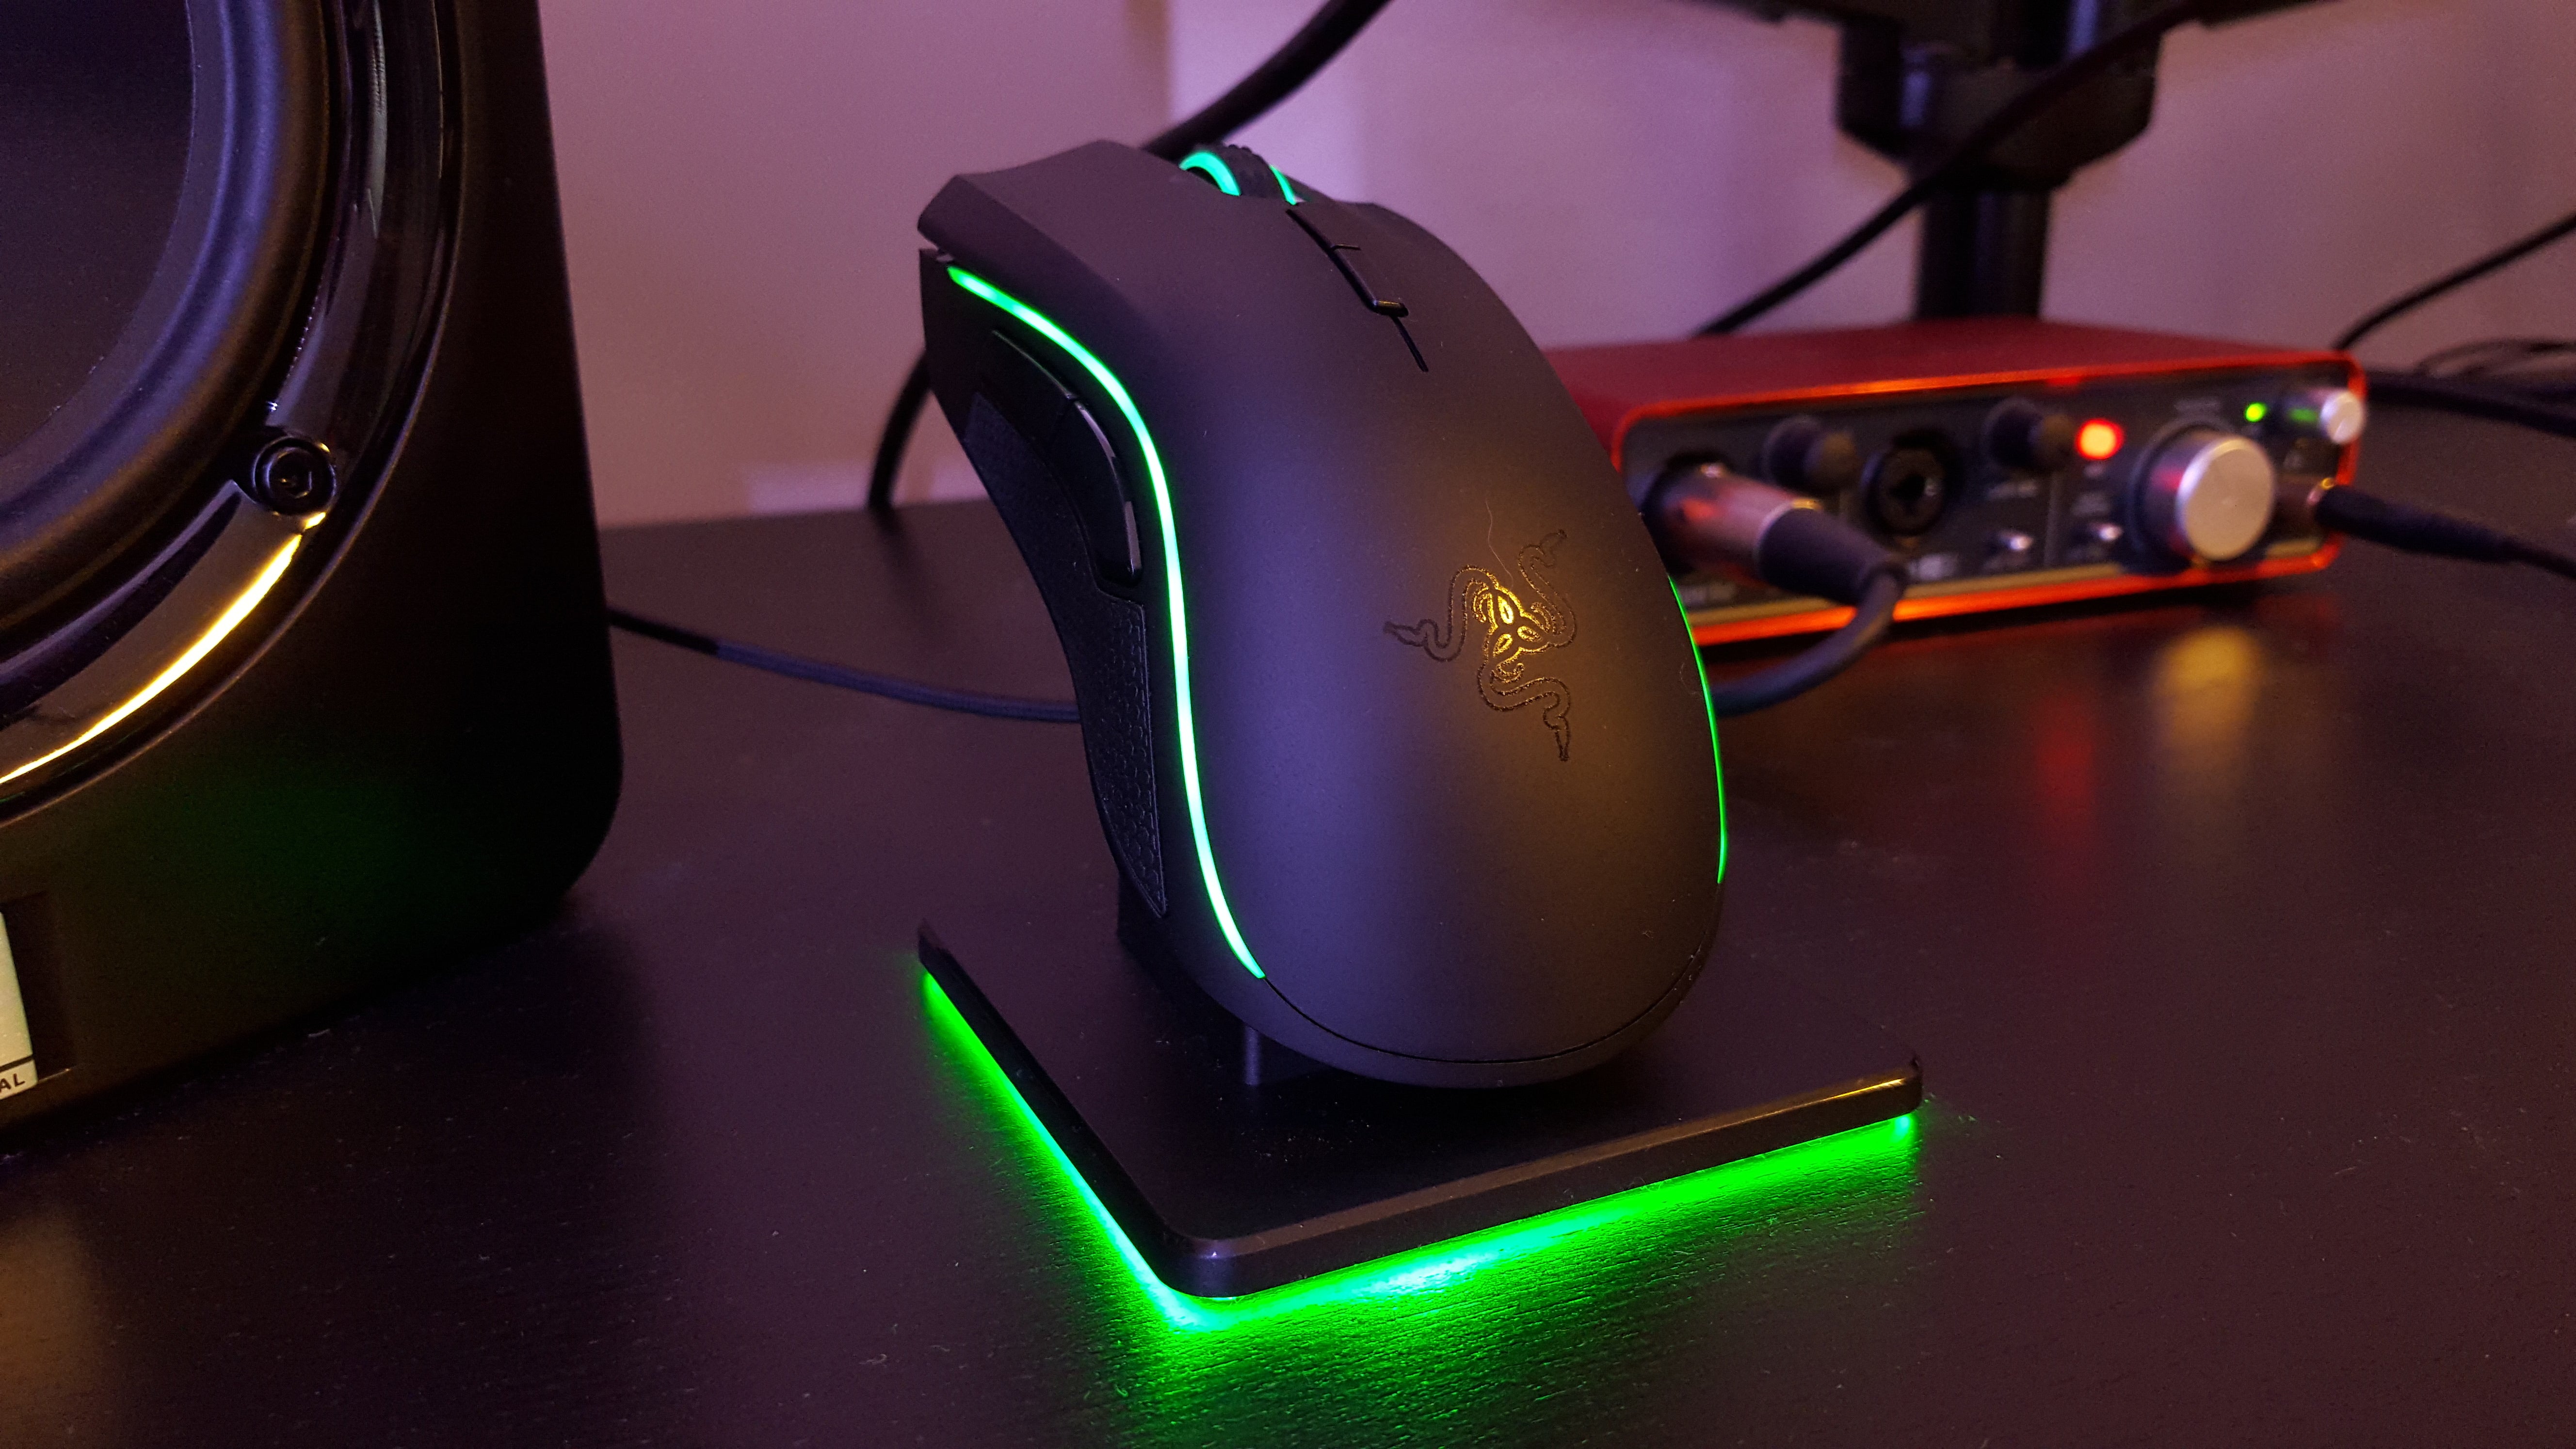 Razer Mamba review: Wired, wireless, or somewhere in between | PCWorld